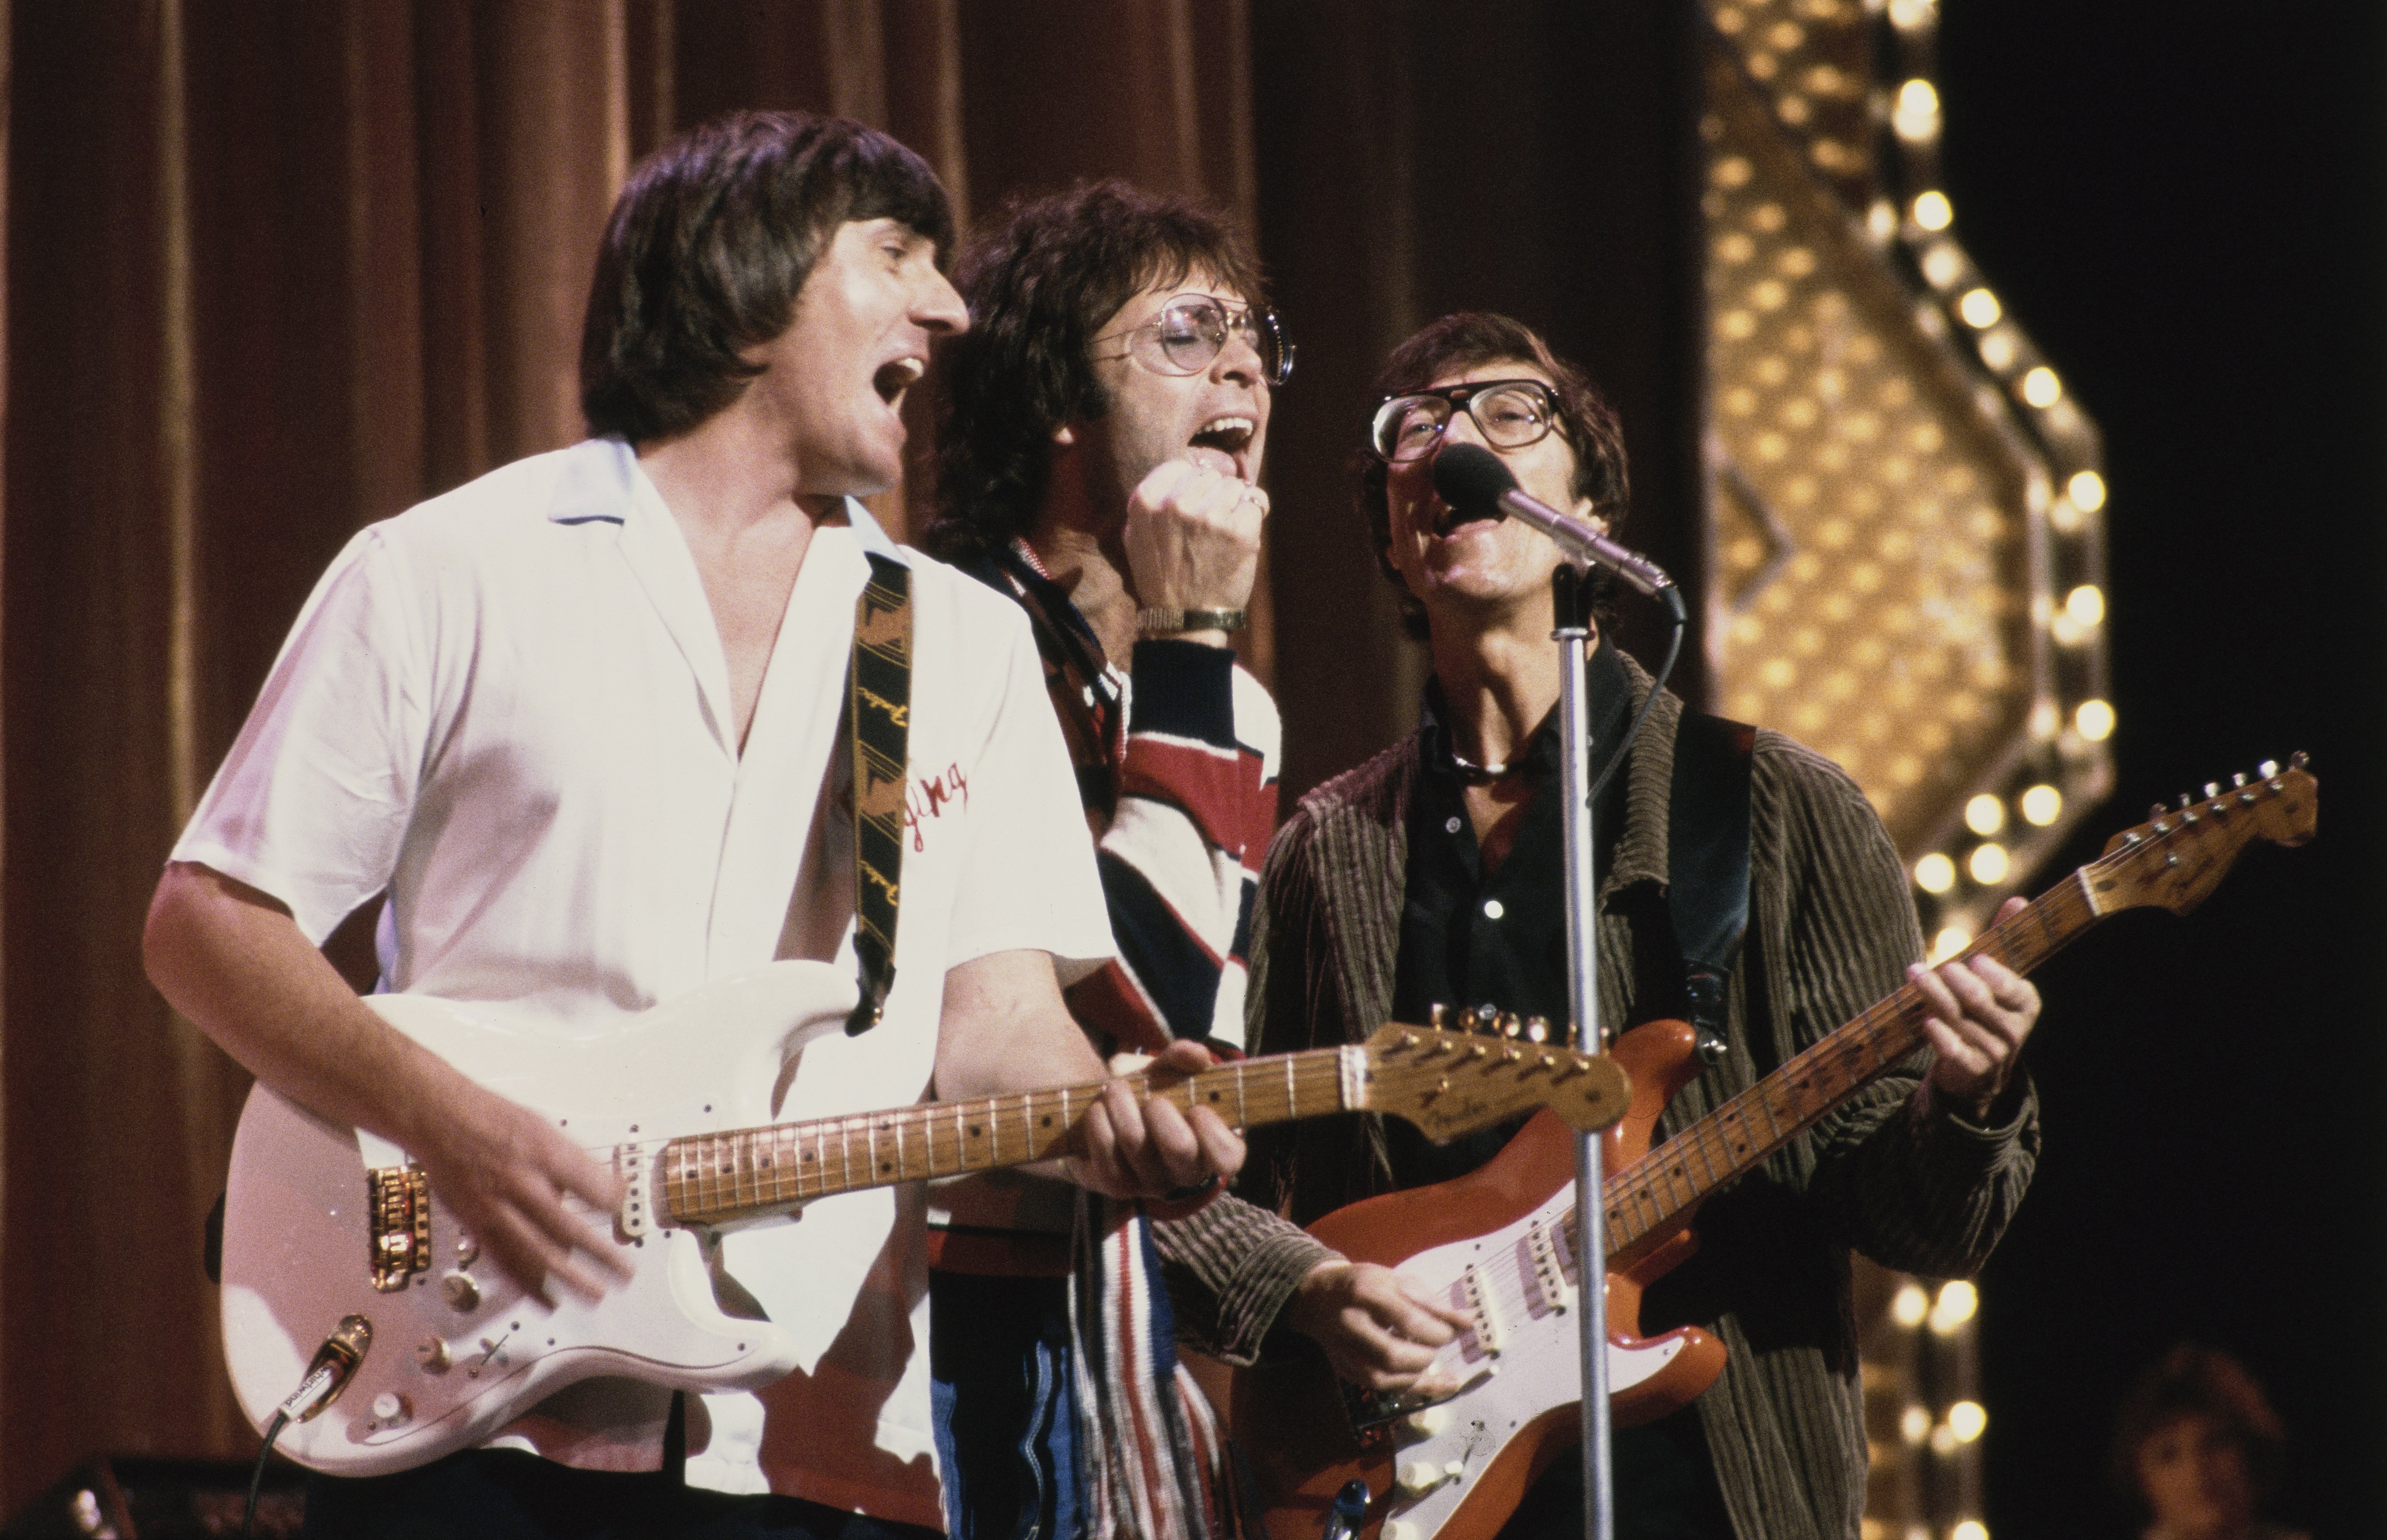  Cliff Richard performs Bruce Welch (left) and Hank Marvin (right) of the Shadows rehearsing at the Theatre Royal London, 